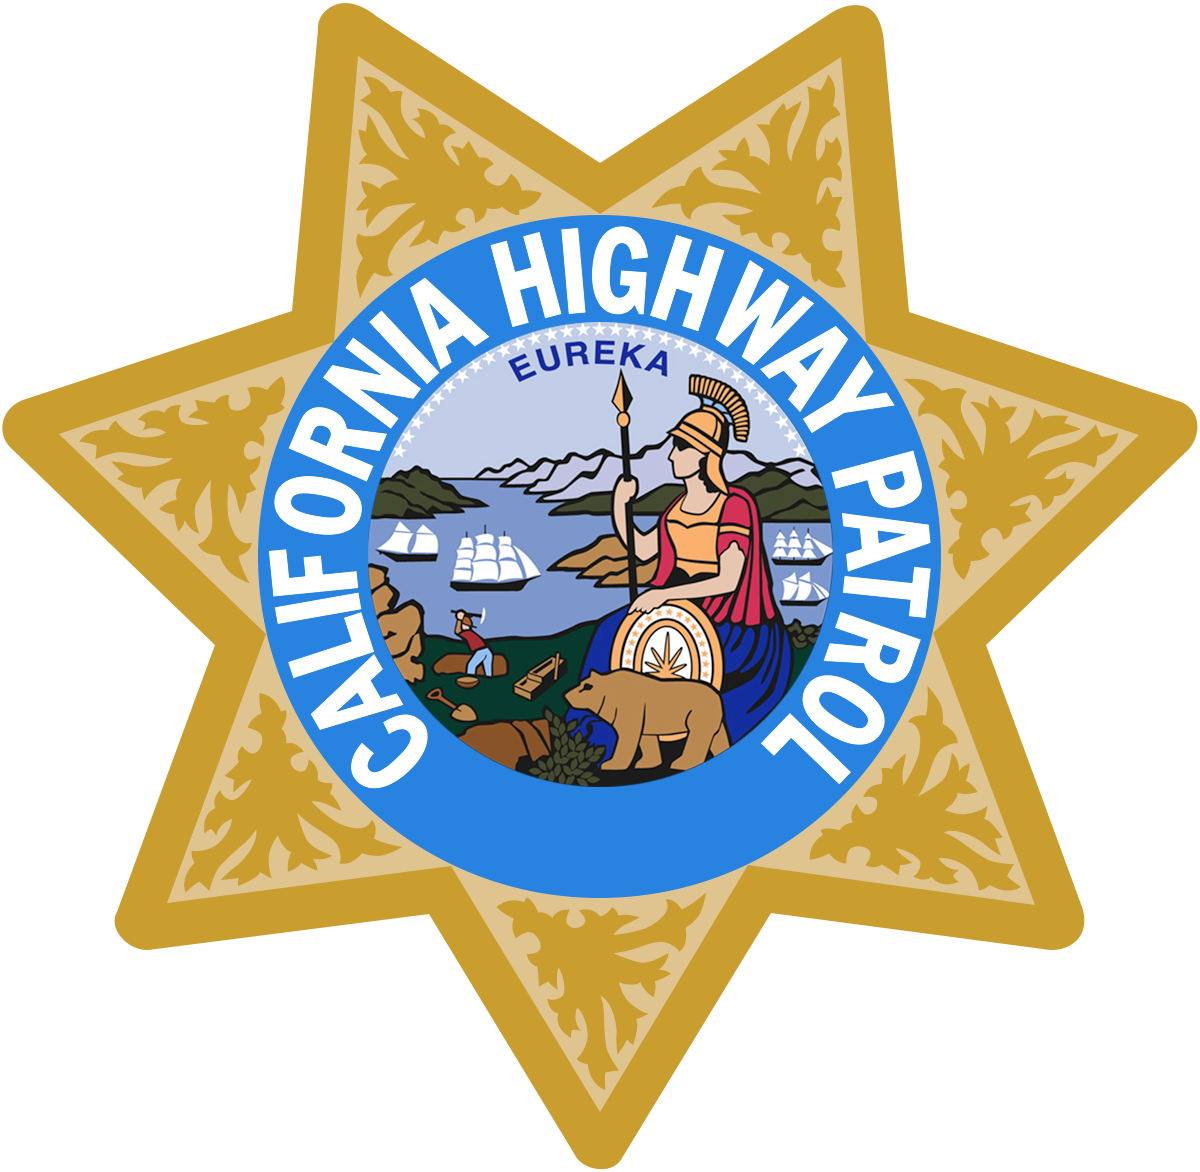 California Highway Patrol government client logo